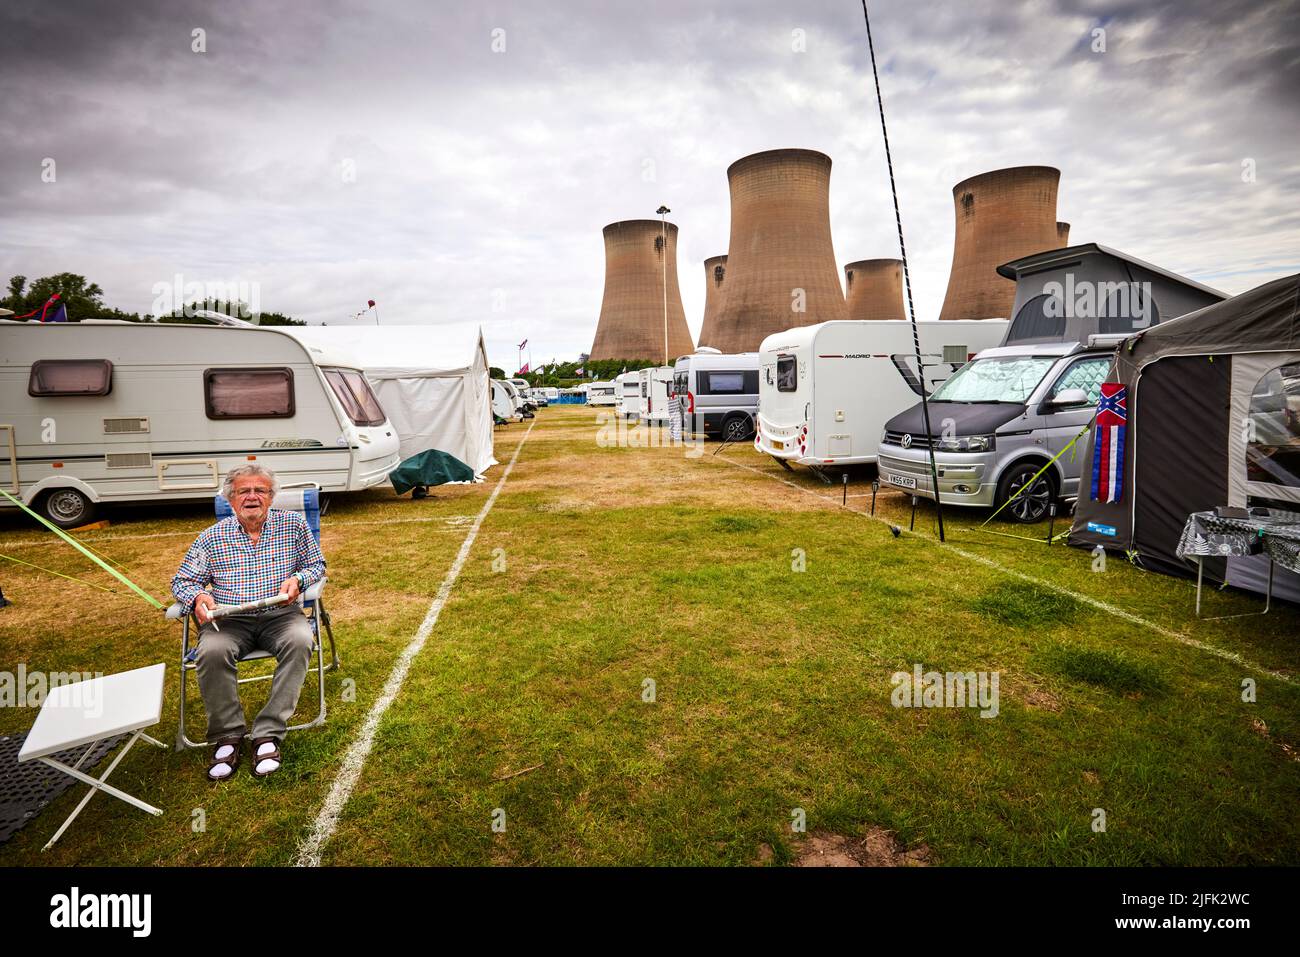 Drax power station, camping on the fields of Drax Sports & Social Club Stock Photo